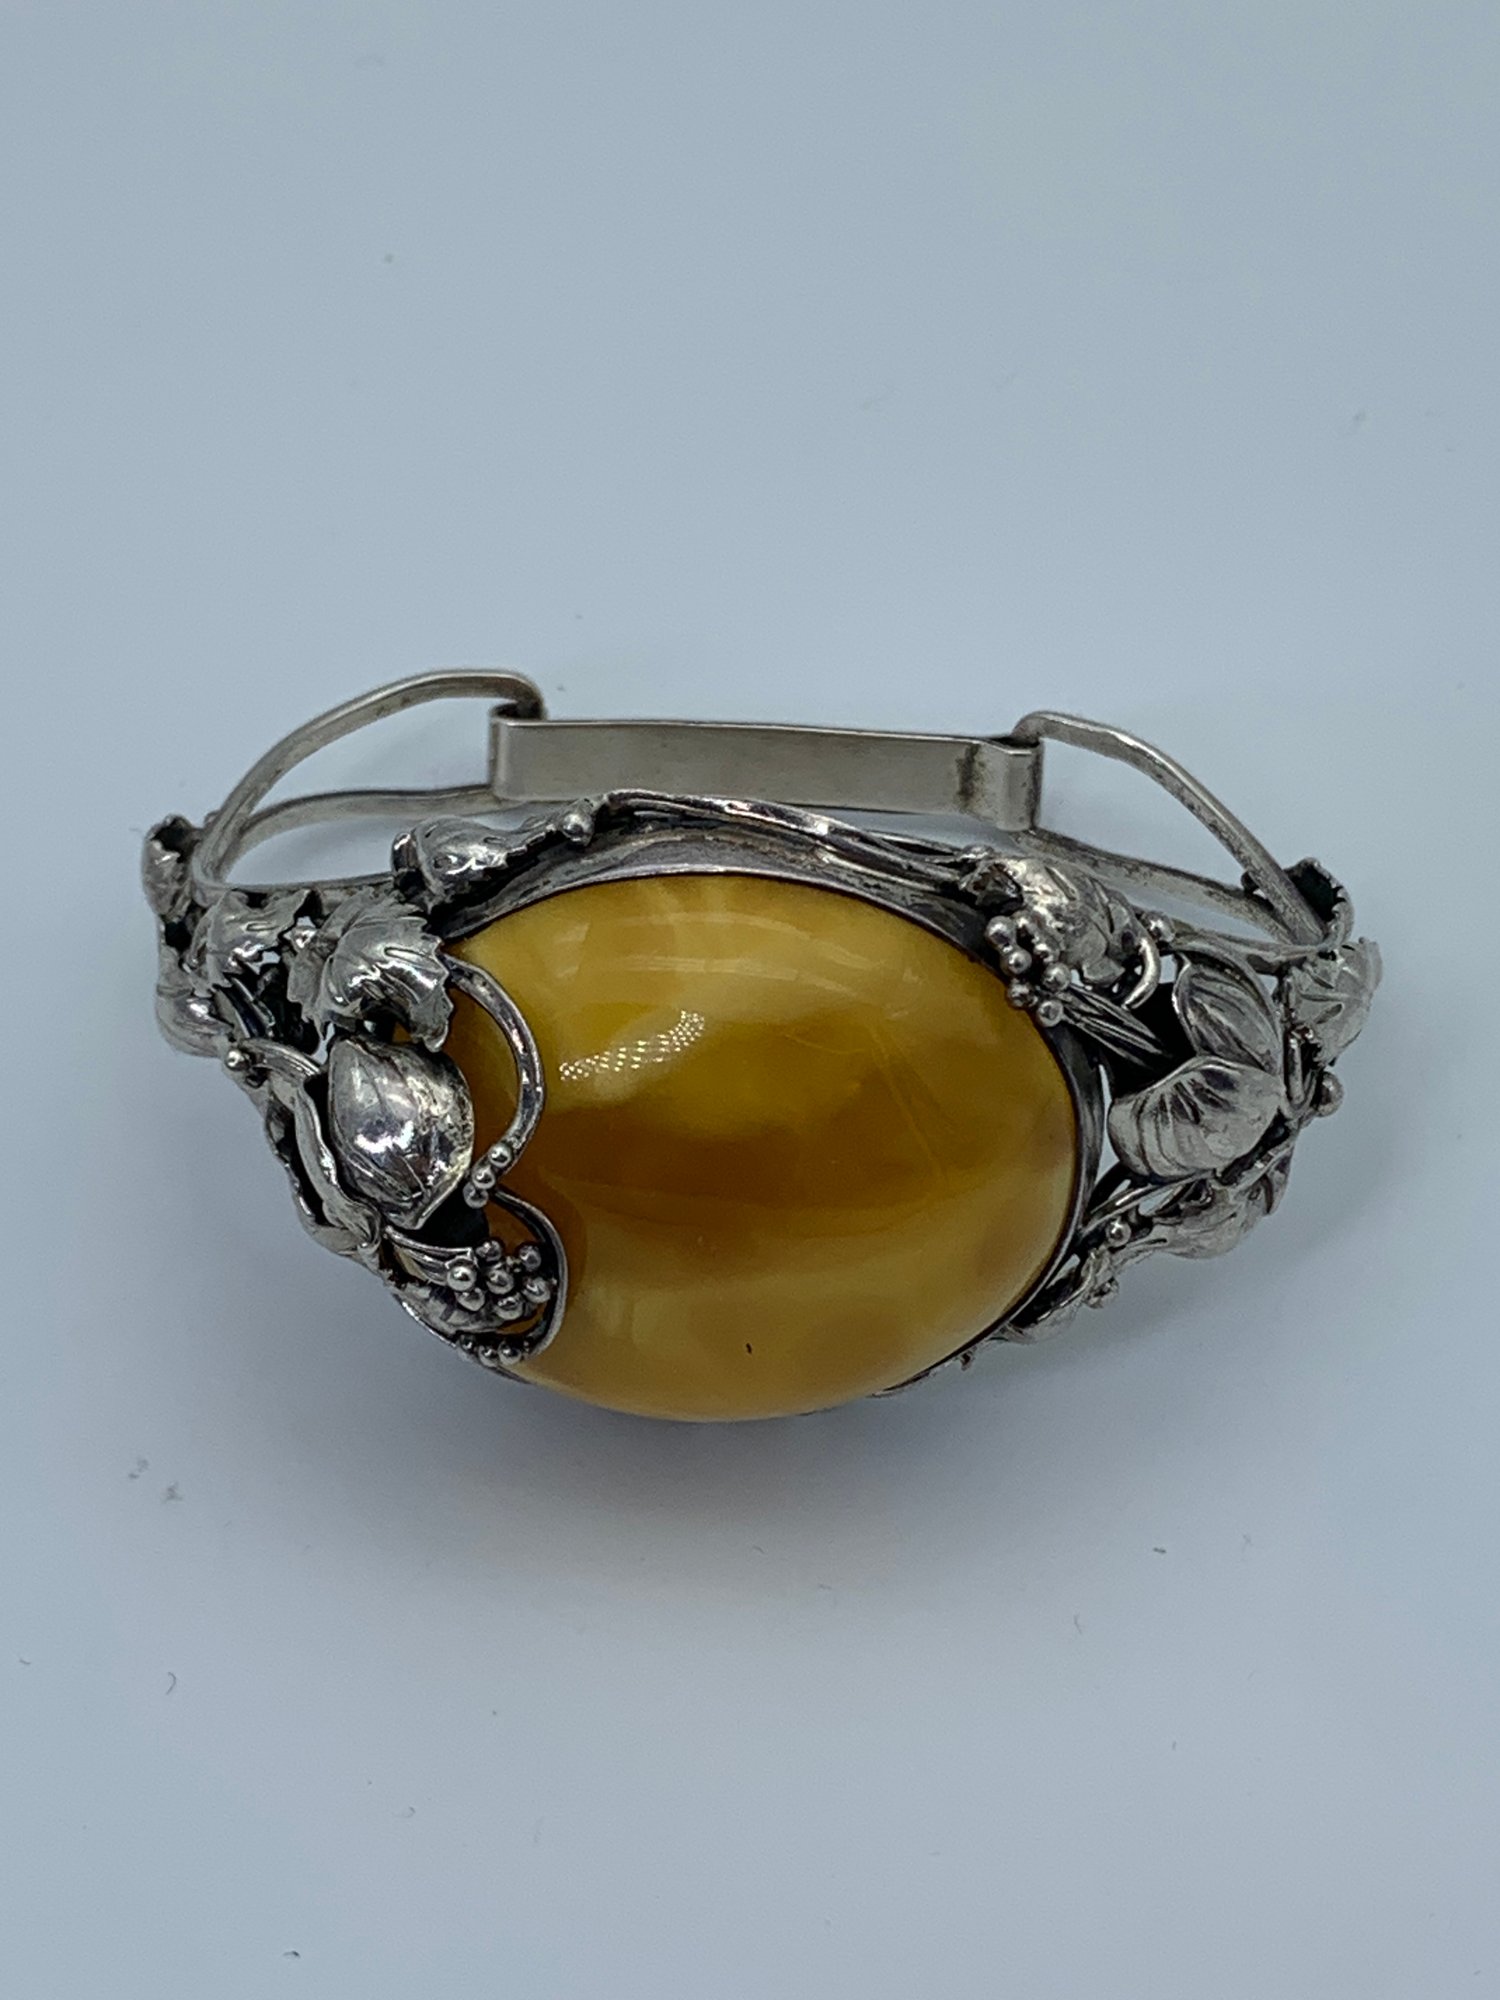 Large Butterscotch Egg Yolk Baltic Amber Sterling Silver Cuff Bracelet With Floral Pattern